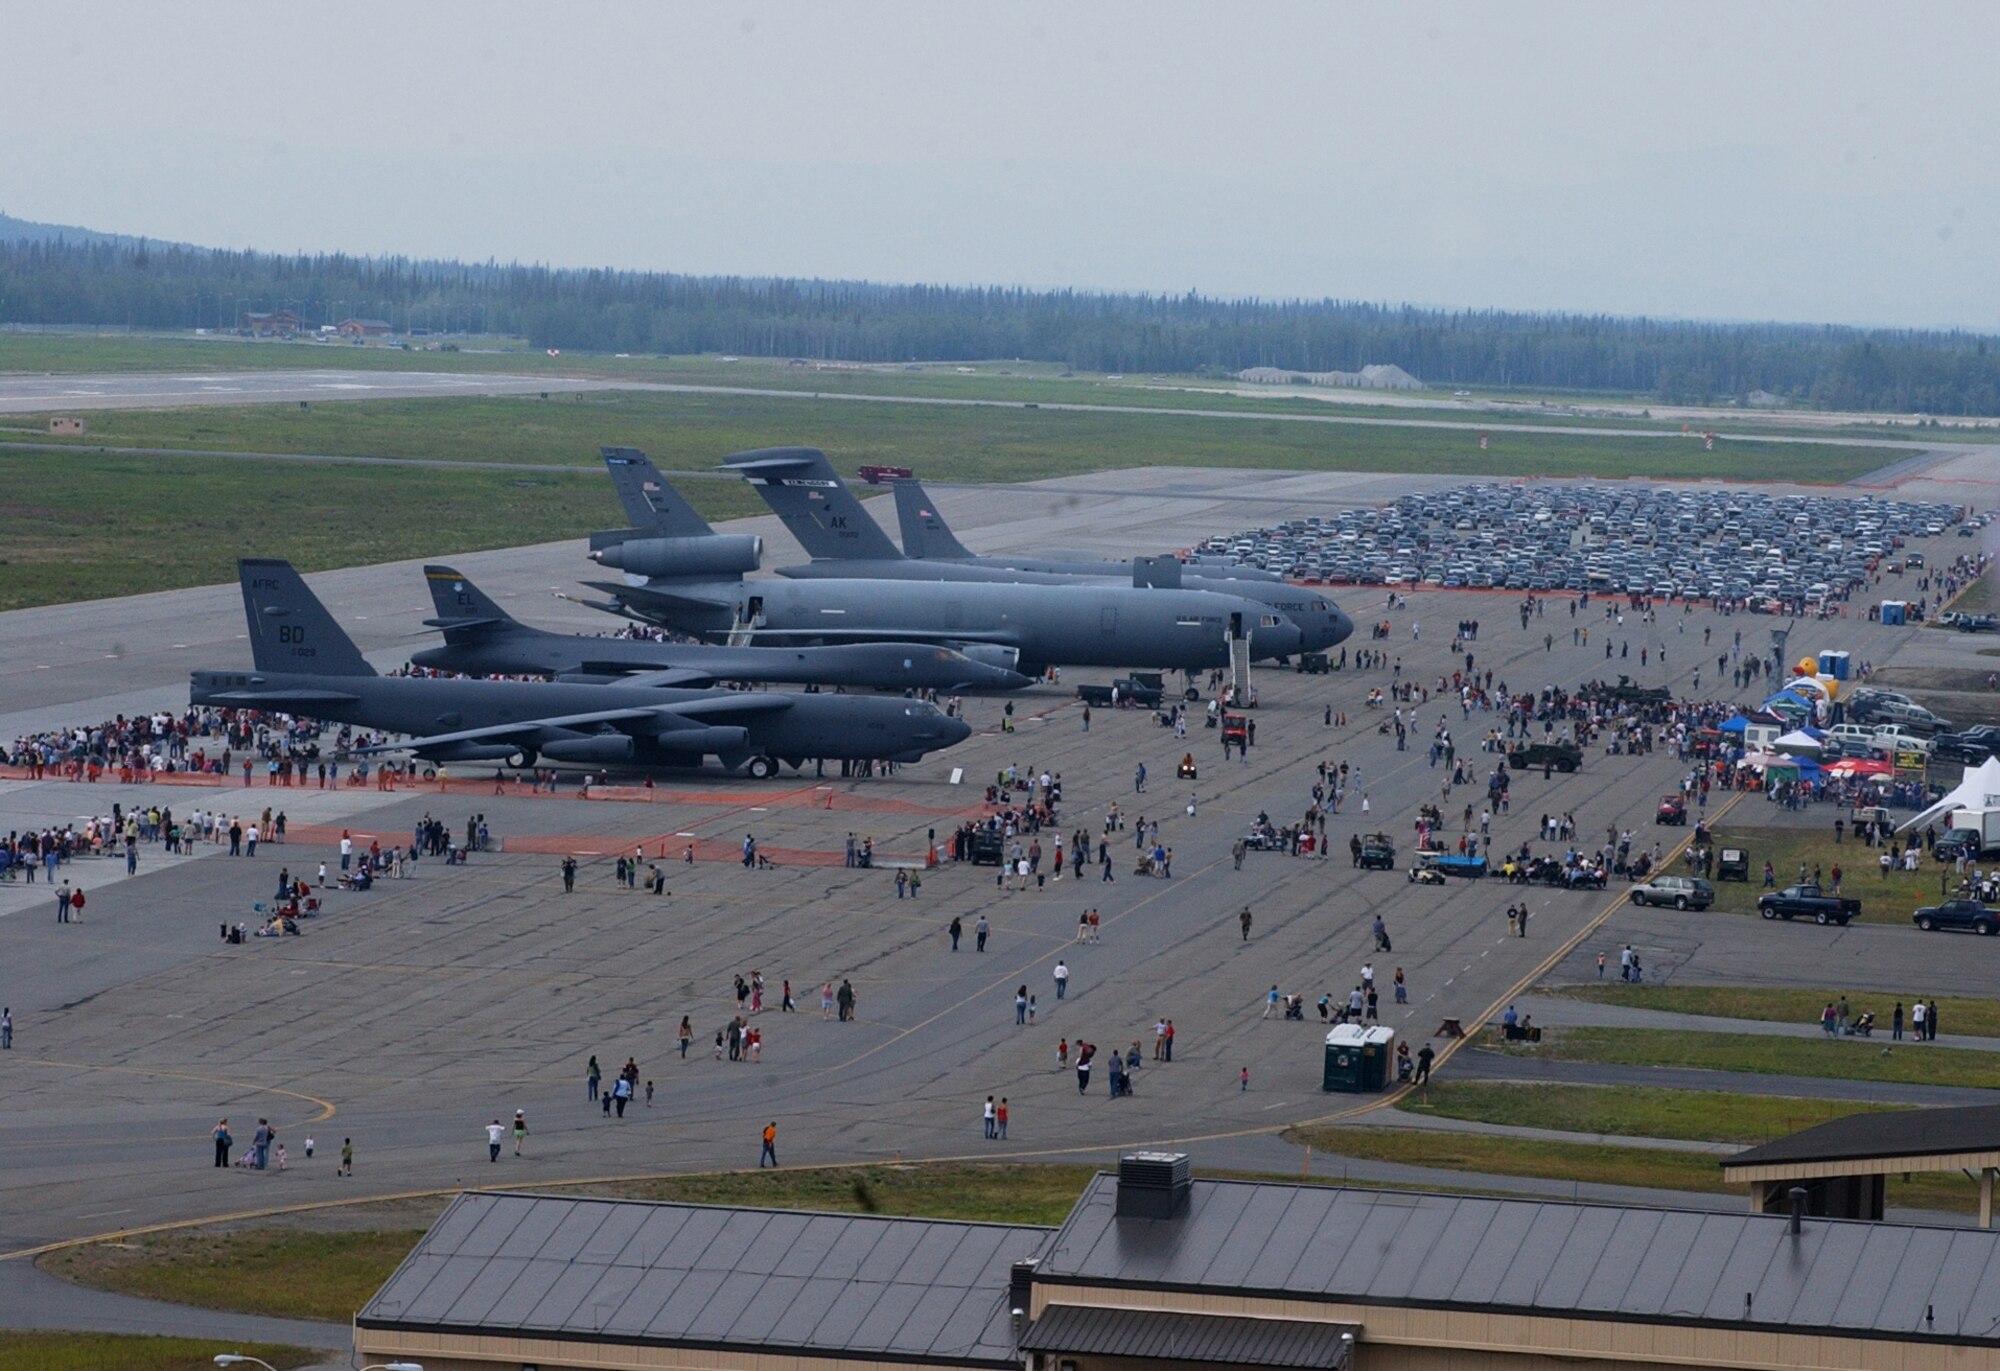 EIELSON AIR FORCE BASE, Alaska--Large crowds moved through several aircraft during the 2007 Soaring into Solstice Open House June 23 here. More than 25,000 people attended the all-day event featuring aerial and ground demonstrations including flybys, simulated airfield attacks, and aerobatic maneuvers as well as concessions, live music and many aircraft displays. (U.S. Air Force photo by Senior Airman Justin Weaver)